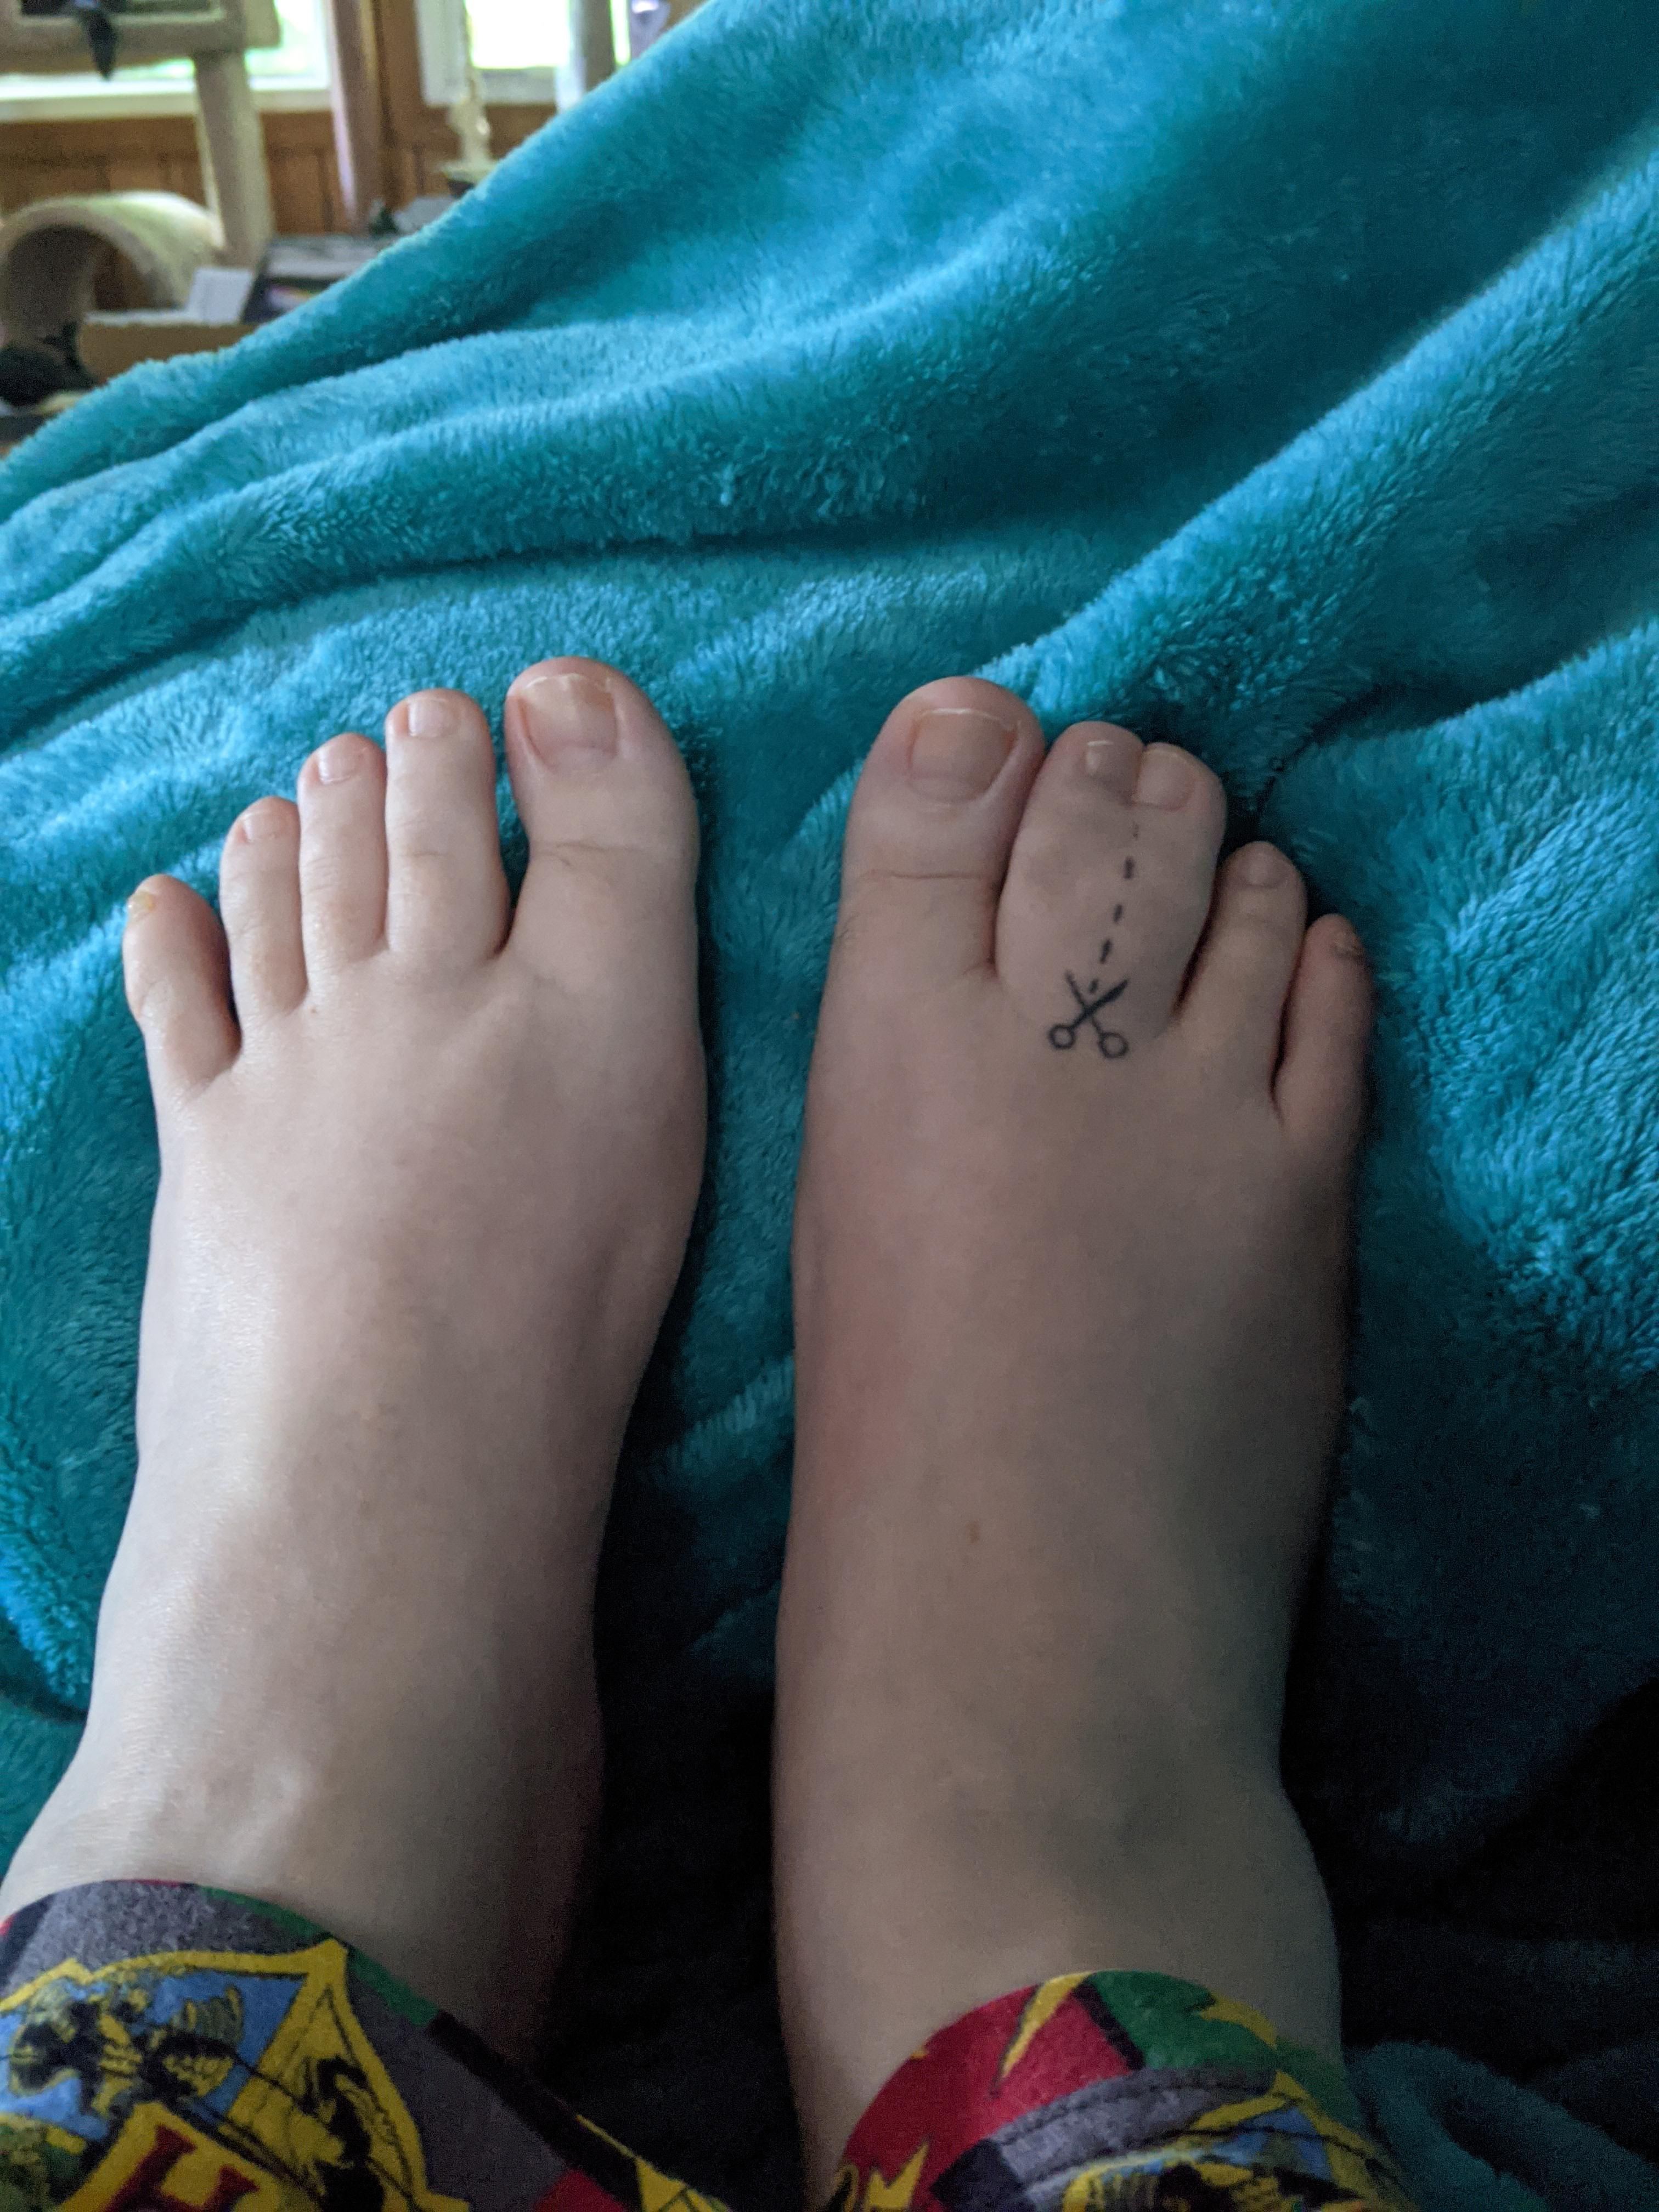 I was told this would fit well here. Behold my webbed toe tattoo!